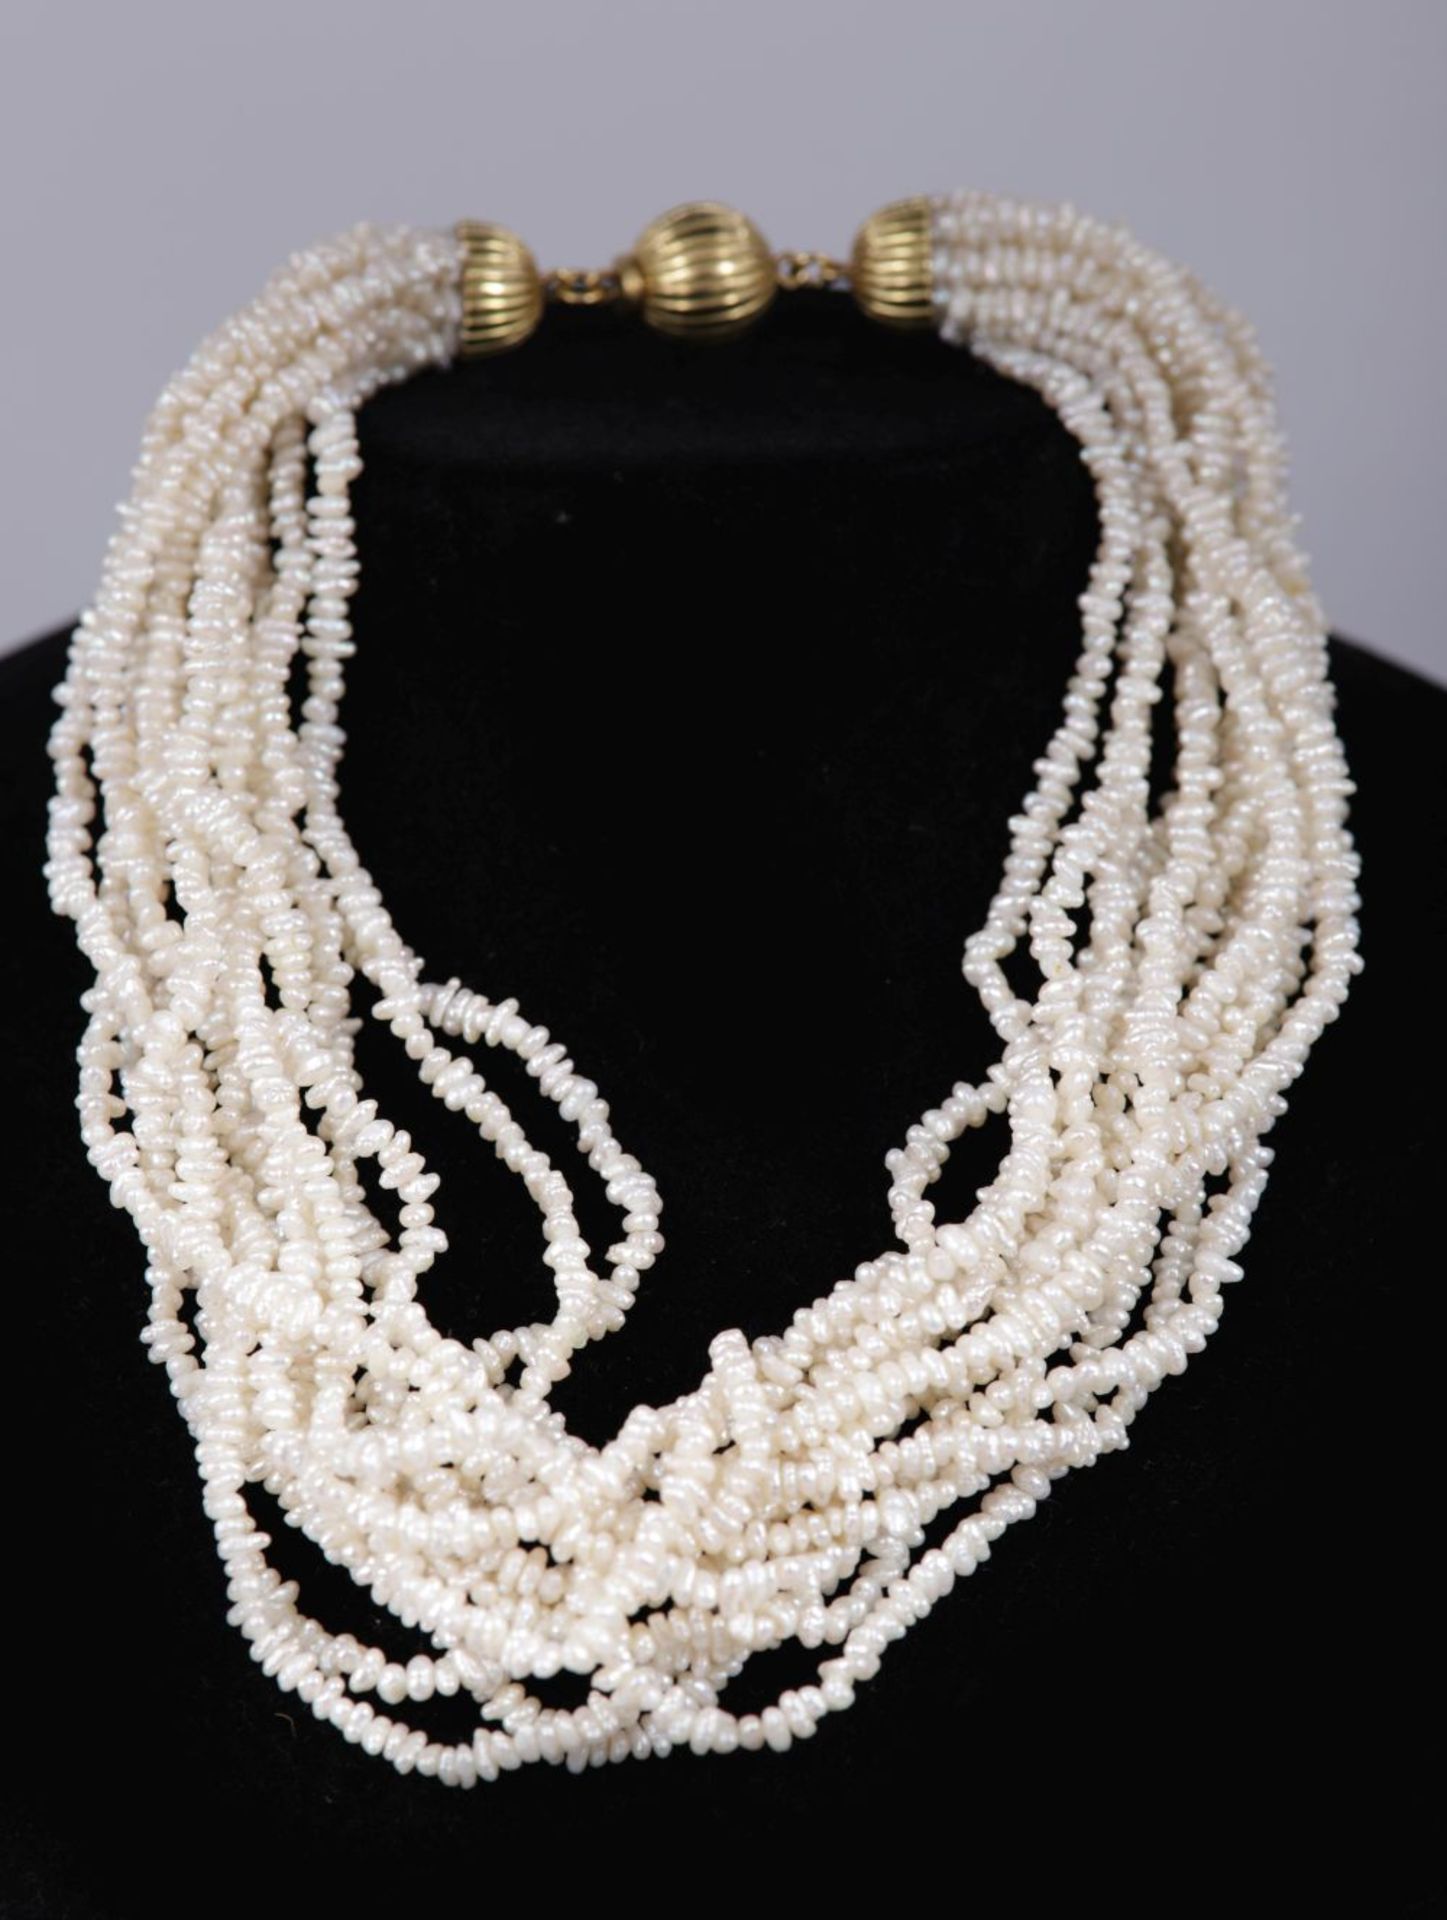 BAROQUE PEARL NECKLACE - Image 2 of 4